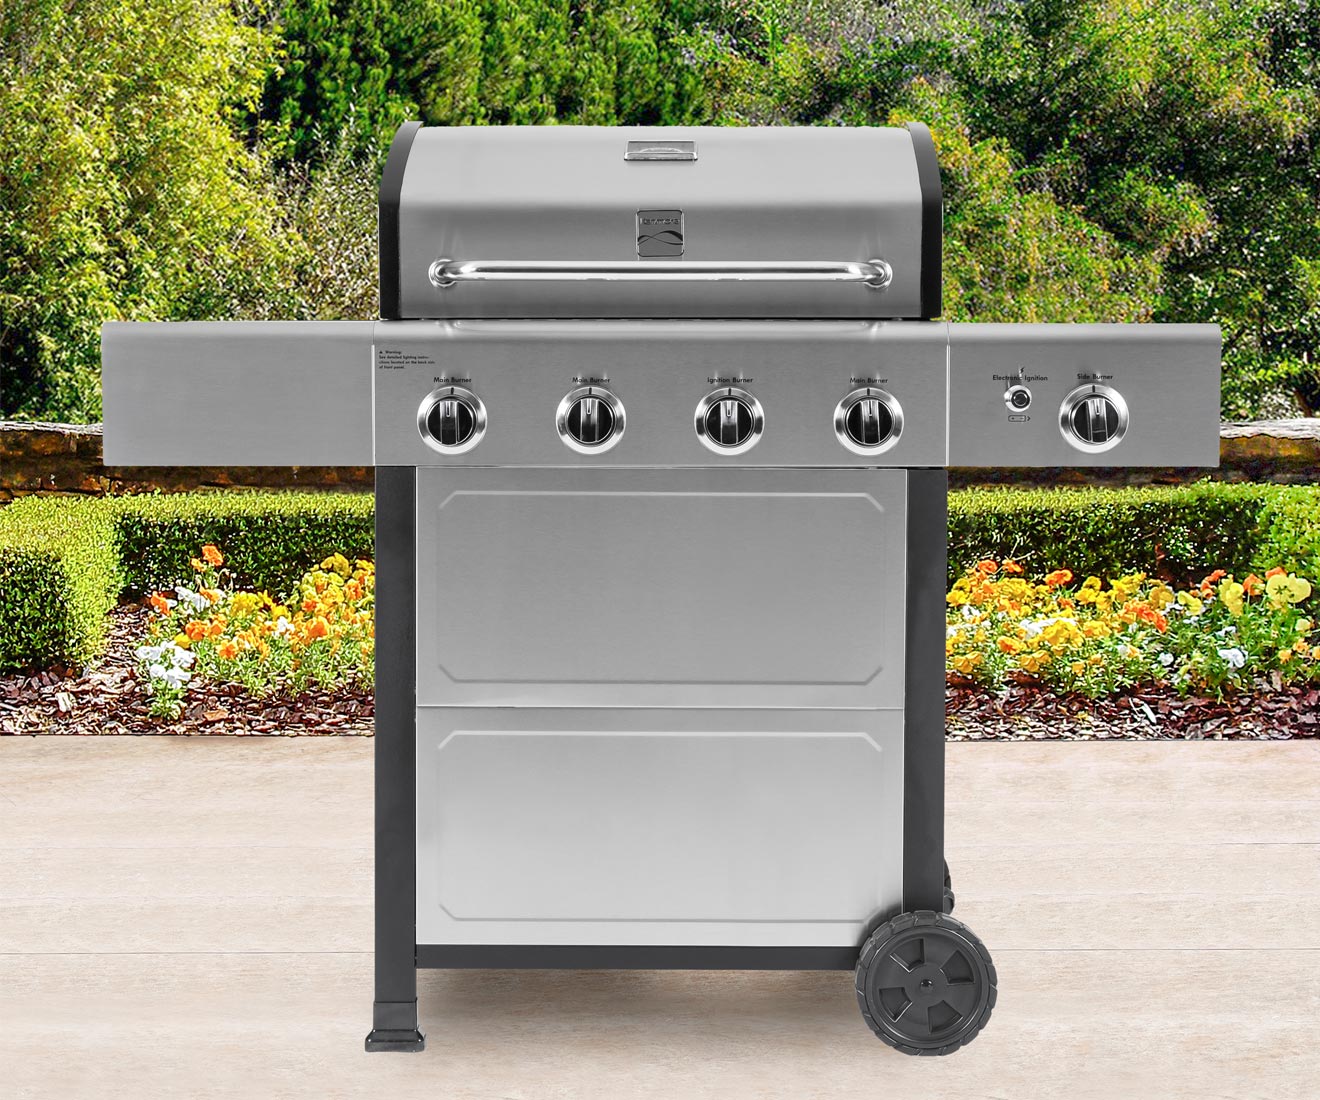 Kenmore 4-Burner Gas Grill with Side Burner Open Cart Style PG-40406S0L Lifestyle Perfect for Any Backyard Garden Deck Patio Outdoor Setting